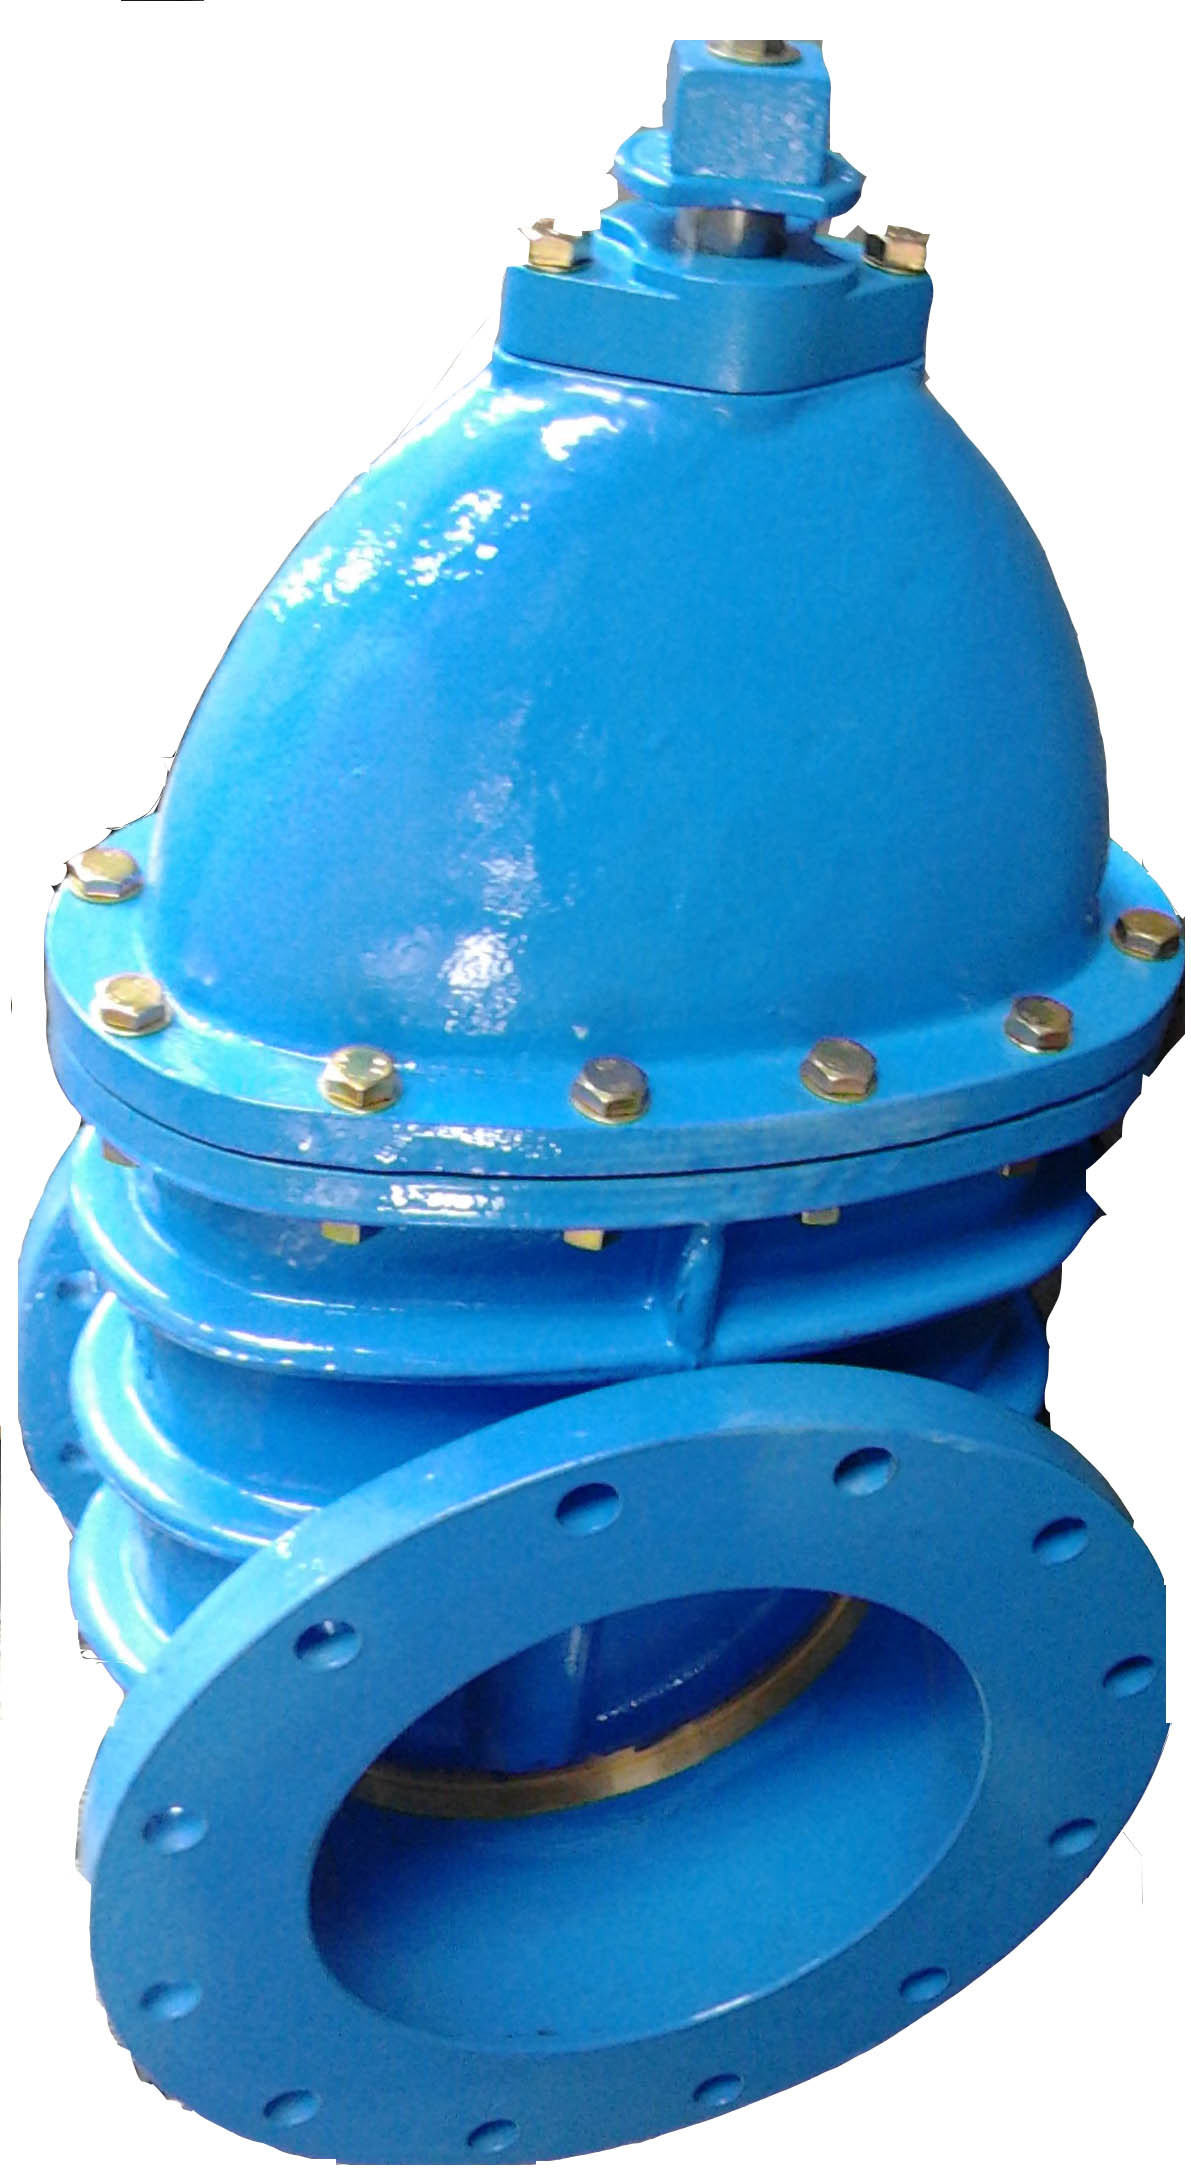 Ductile Iron Body and Metal Seat Gate Valve